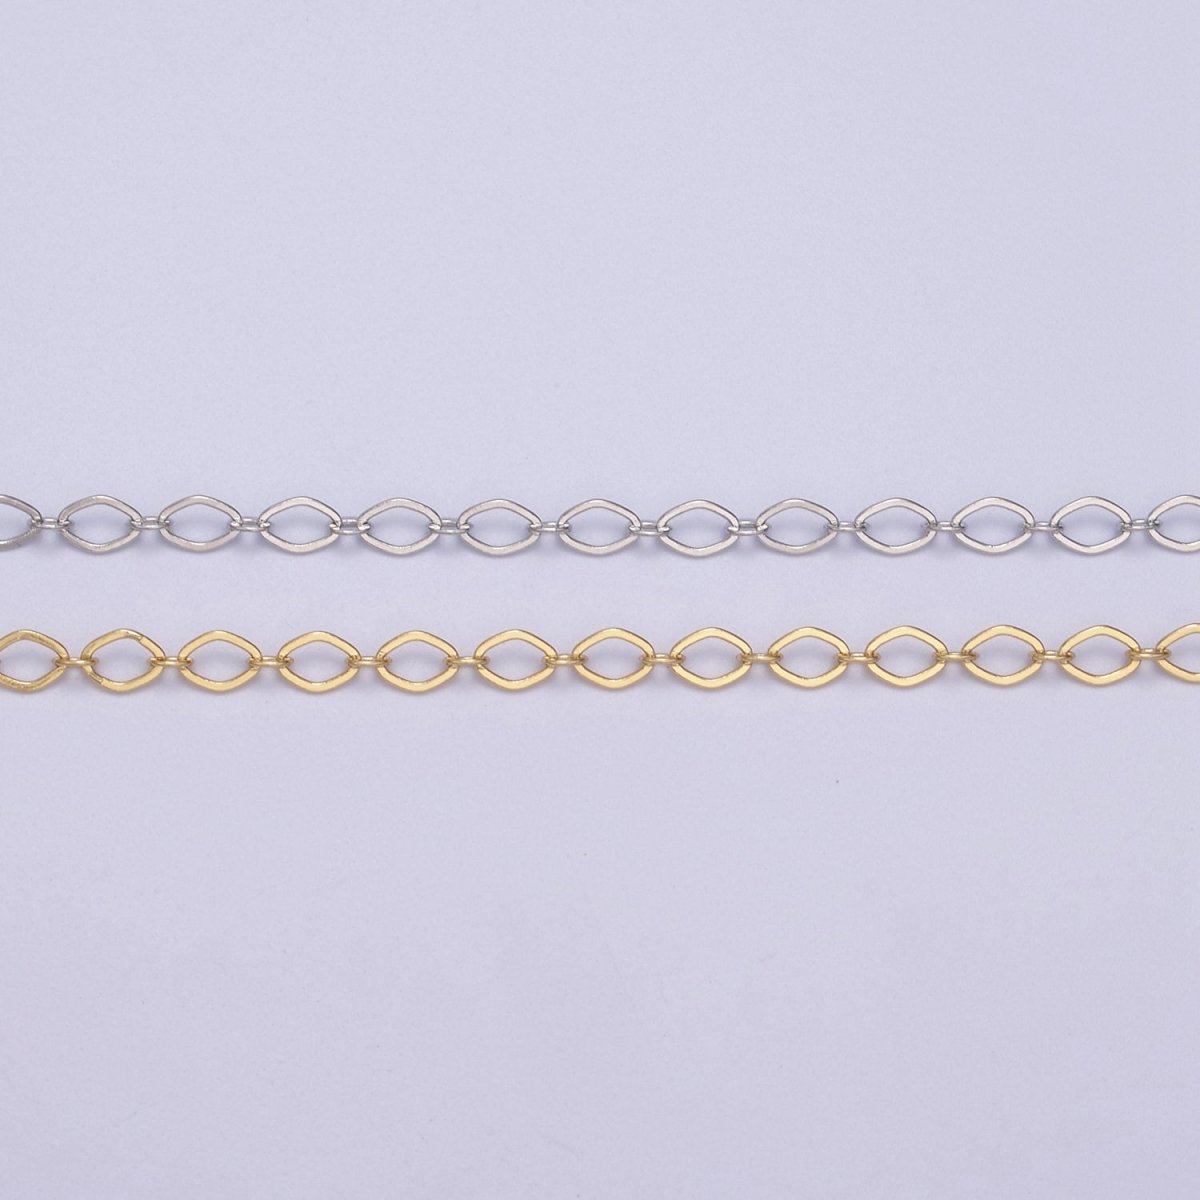 24k Gold Filled Gold Oval Rhombus Chain by Yard, Oval Link, Wholesale Bulk Roll Chain for Jewelry Making, Width 3.3mm | ROLL-611 ROLL-612 - DLUXCA